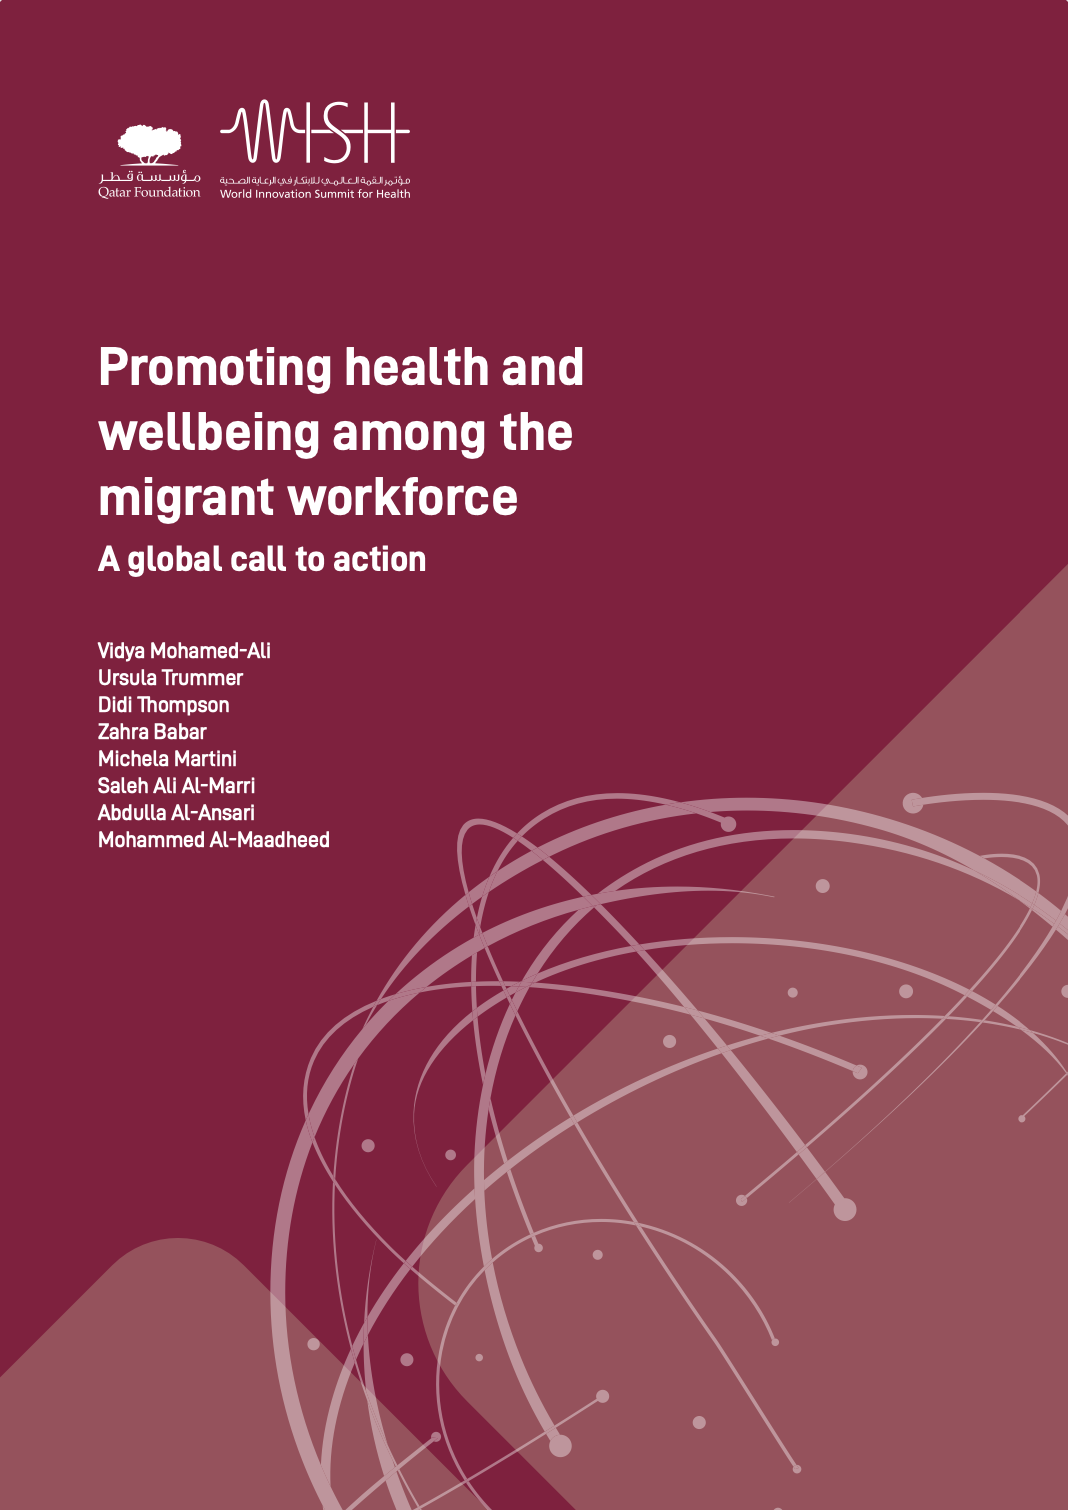 Promoting health and wellbeing among the migrant workforce